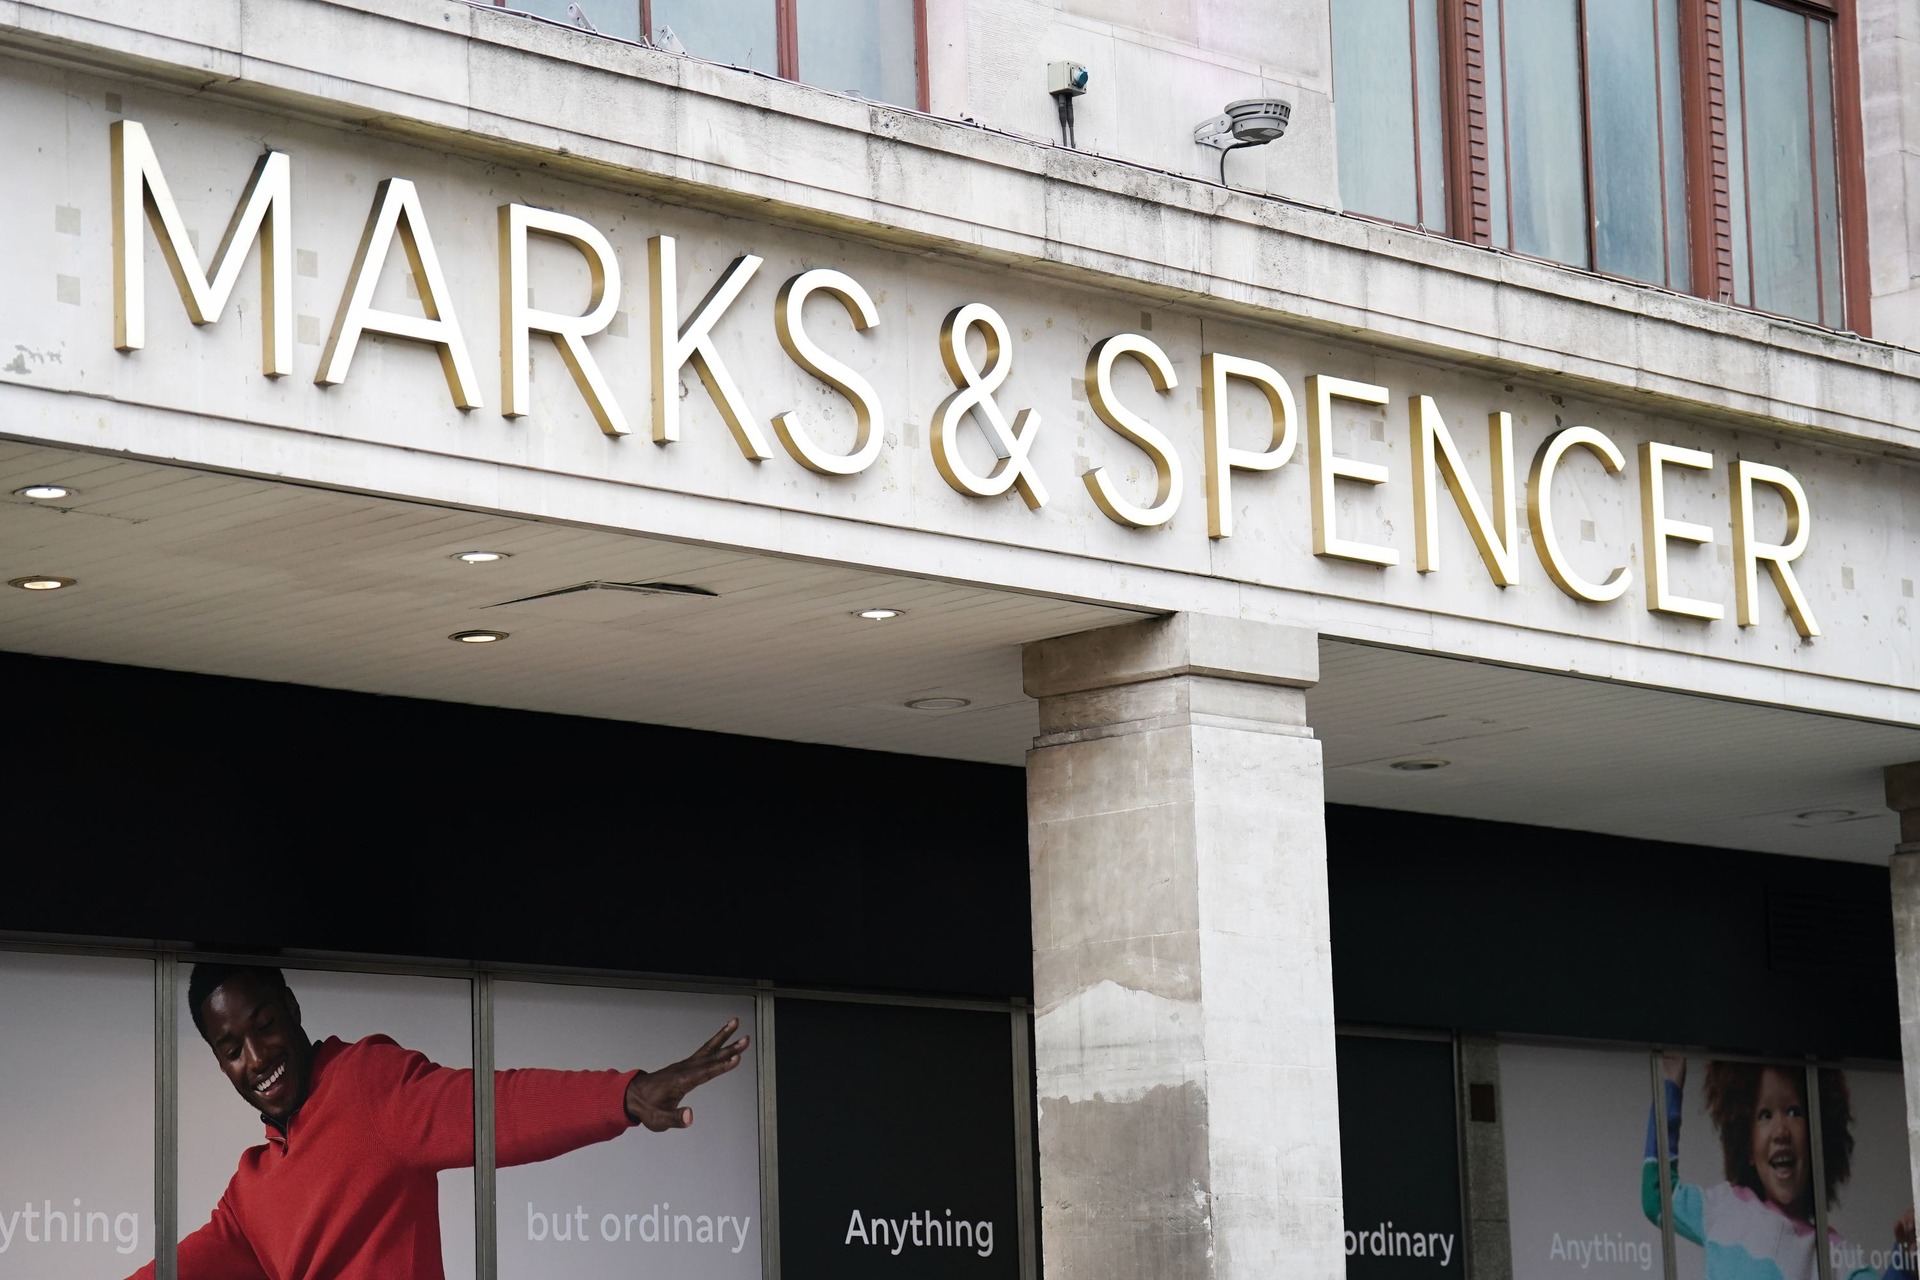 M&S said they were only on the list due to a technical issue.